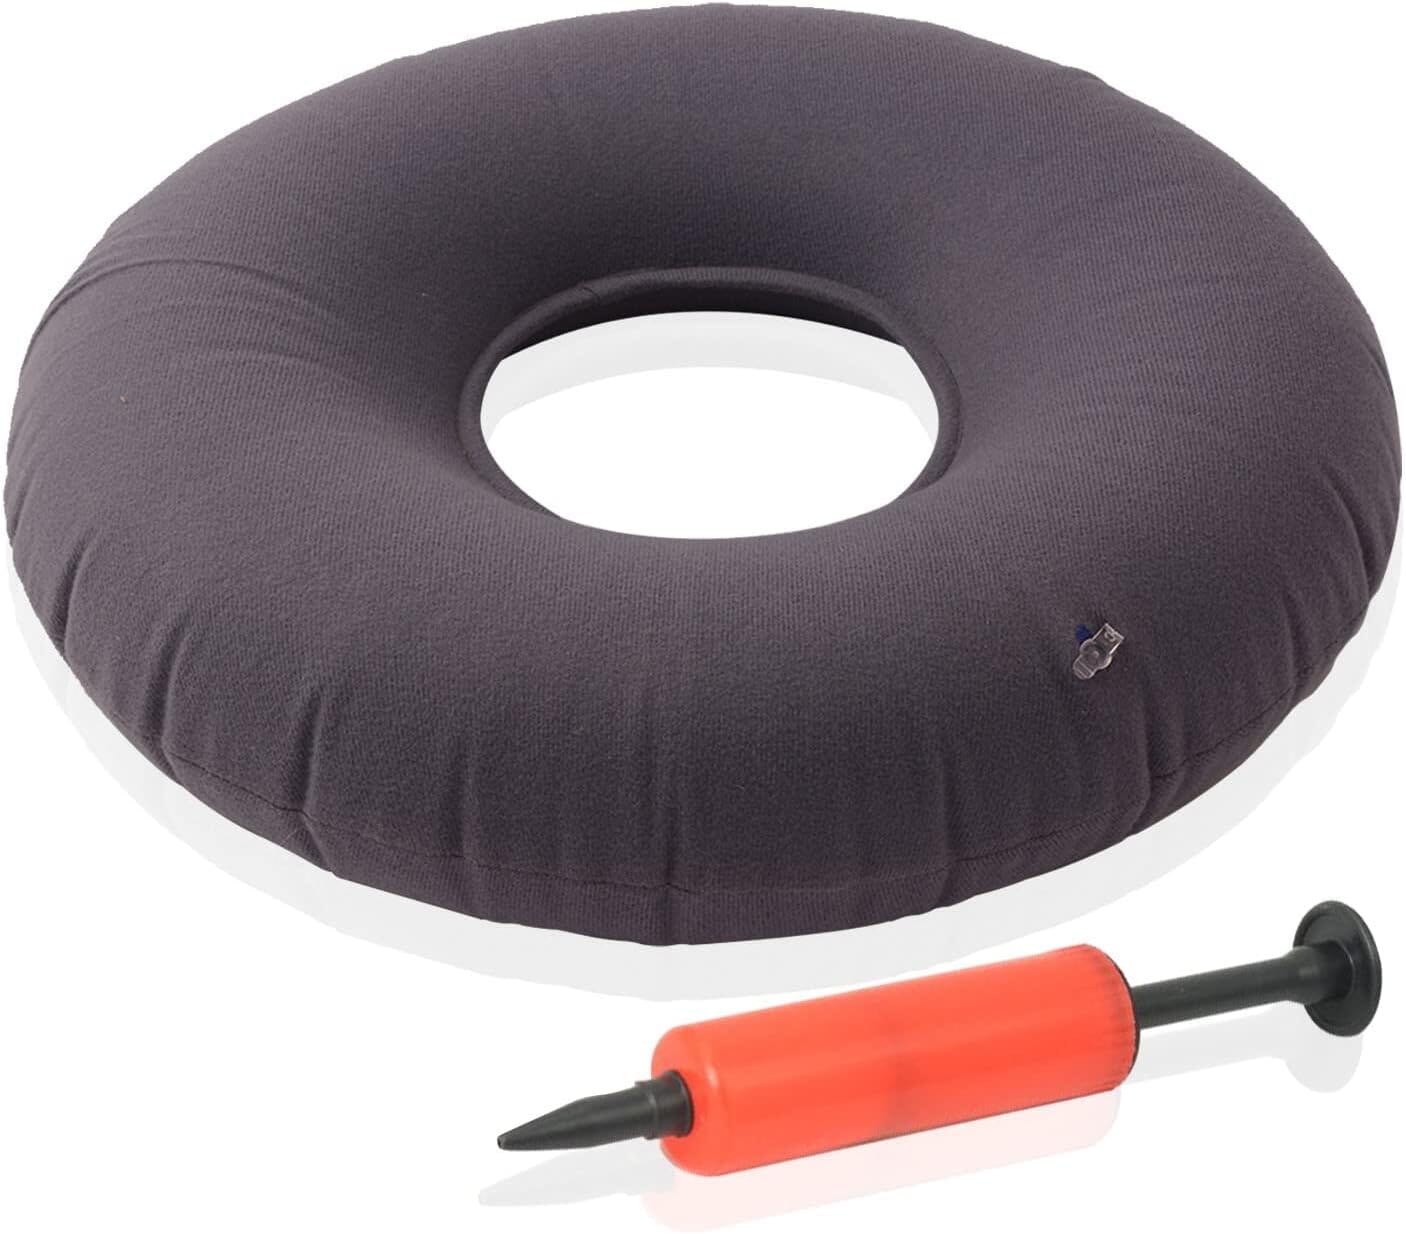 Dr. Frederick's Original Donut Pillow - 18" Inflatable Donut Cushion for Tailbone Pain Relief - Donut Pillow Seat Cushion for Hemorrhoids, Bed Sores, Prostatitis - Gray Flannel & Vinyl Back Pain Dr. Frederick's Original 